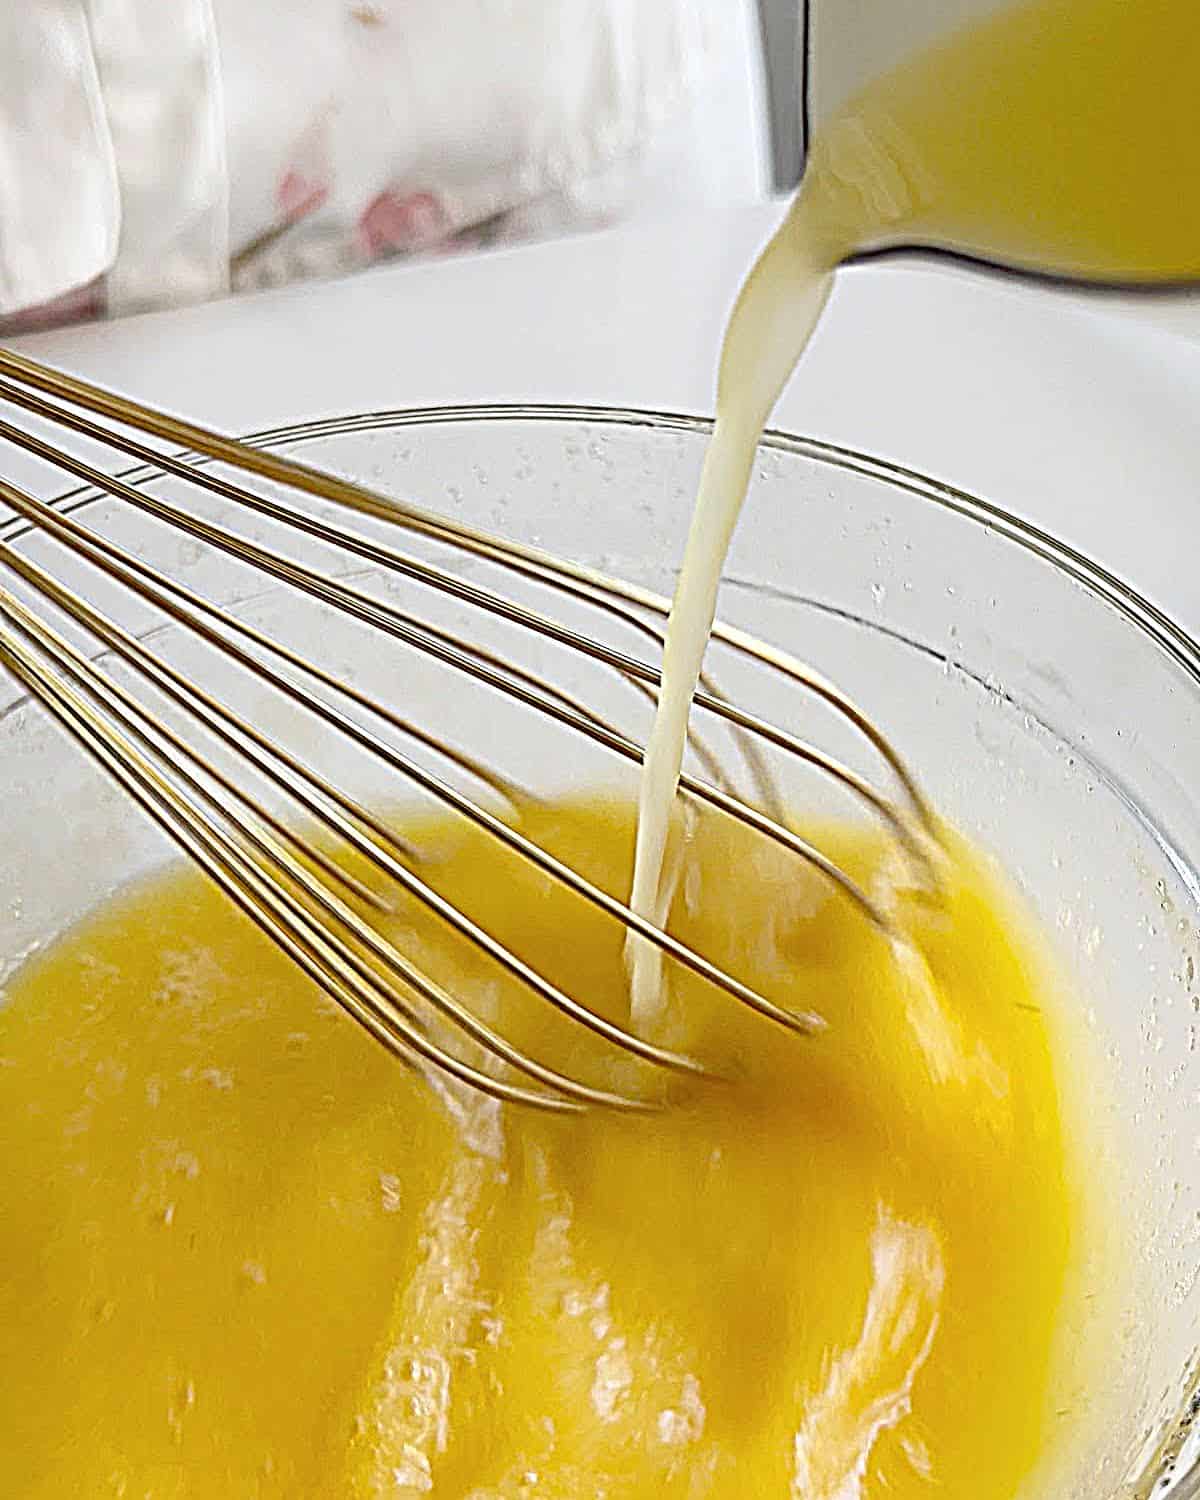 Whisking melted butter and lemon juice into beaten eggs in a glass bowl.